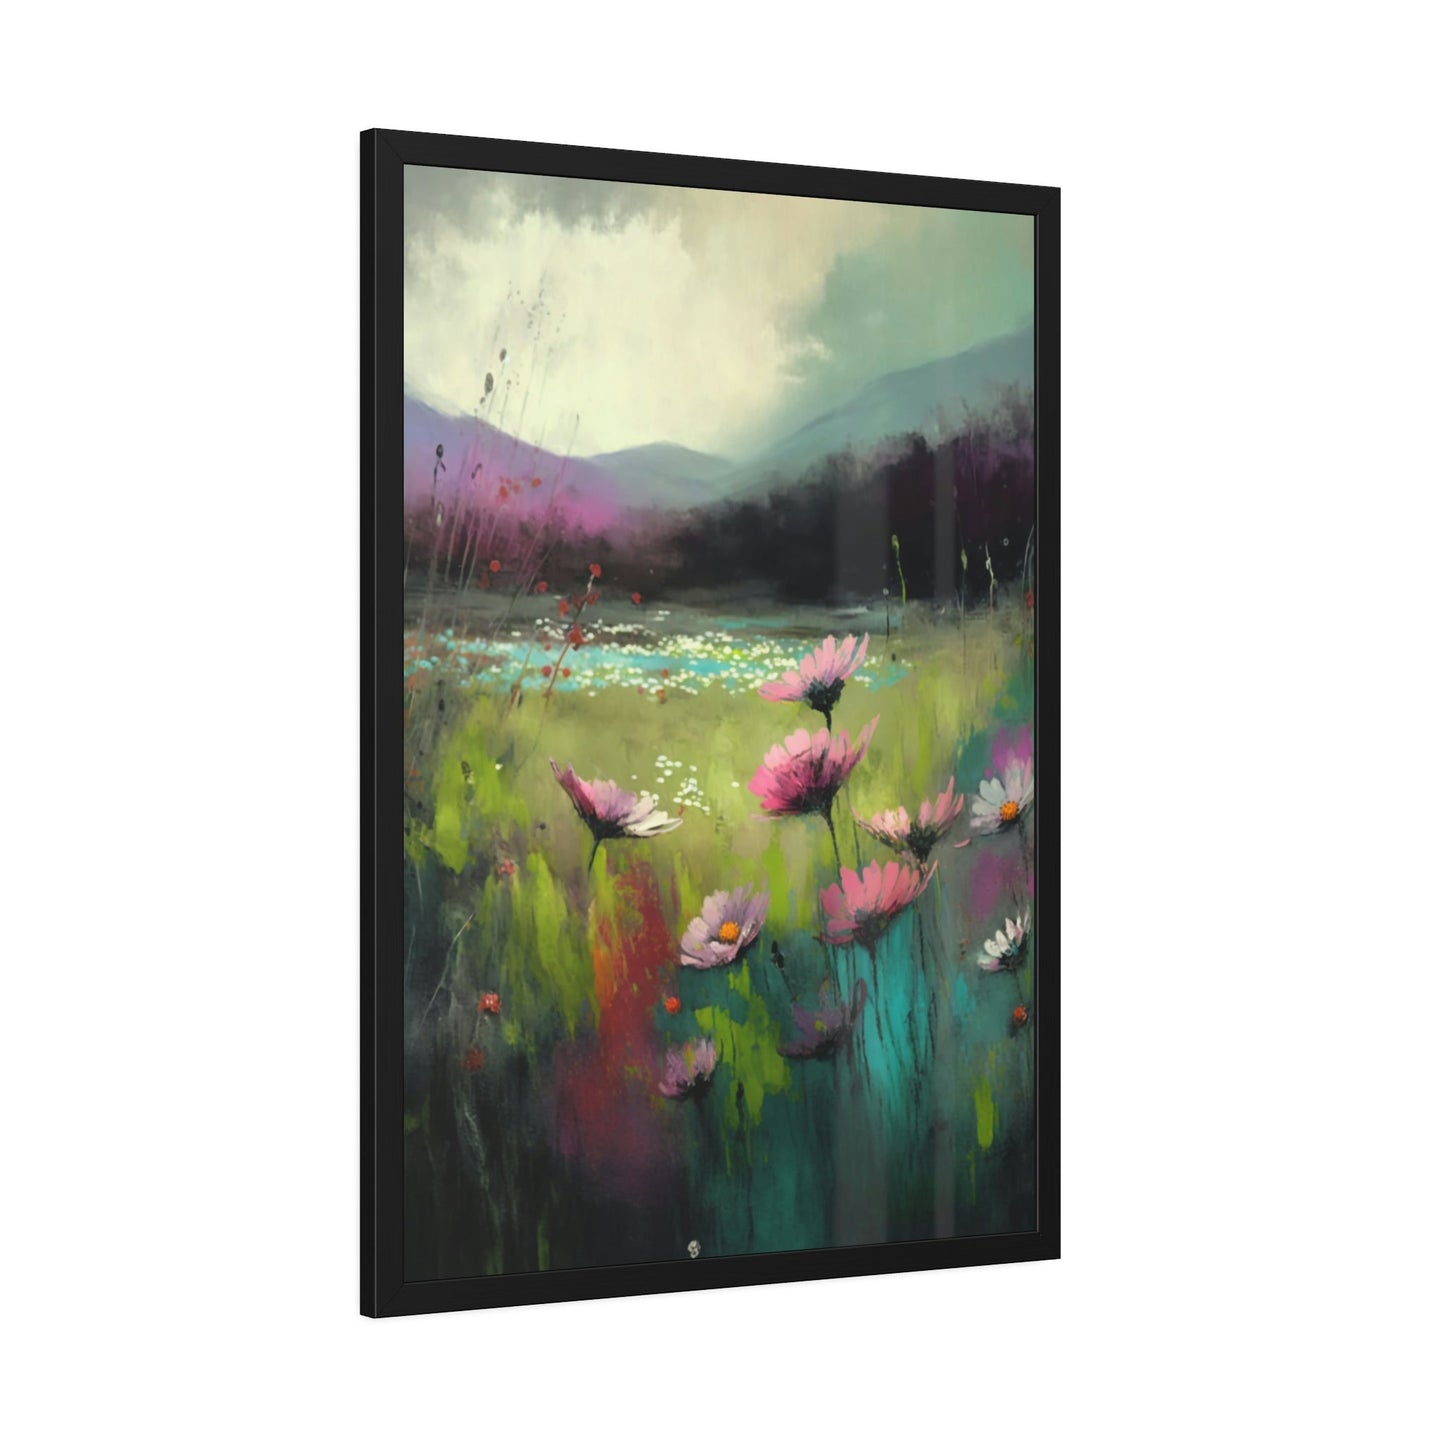 Chromatic Abstraction: A Framed Canvas & Poster Artwork of a Vibrant Landscape